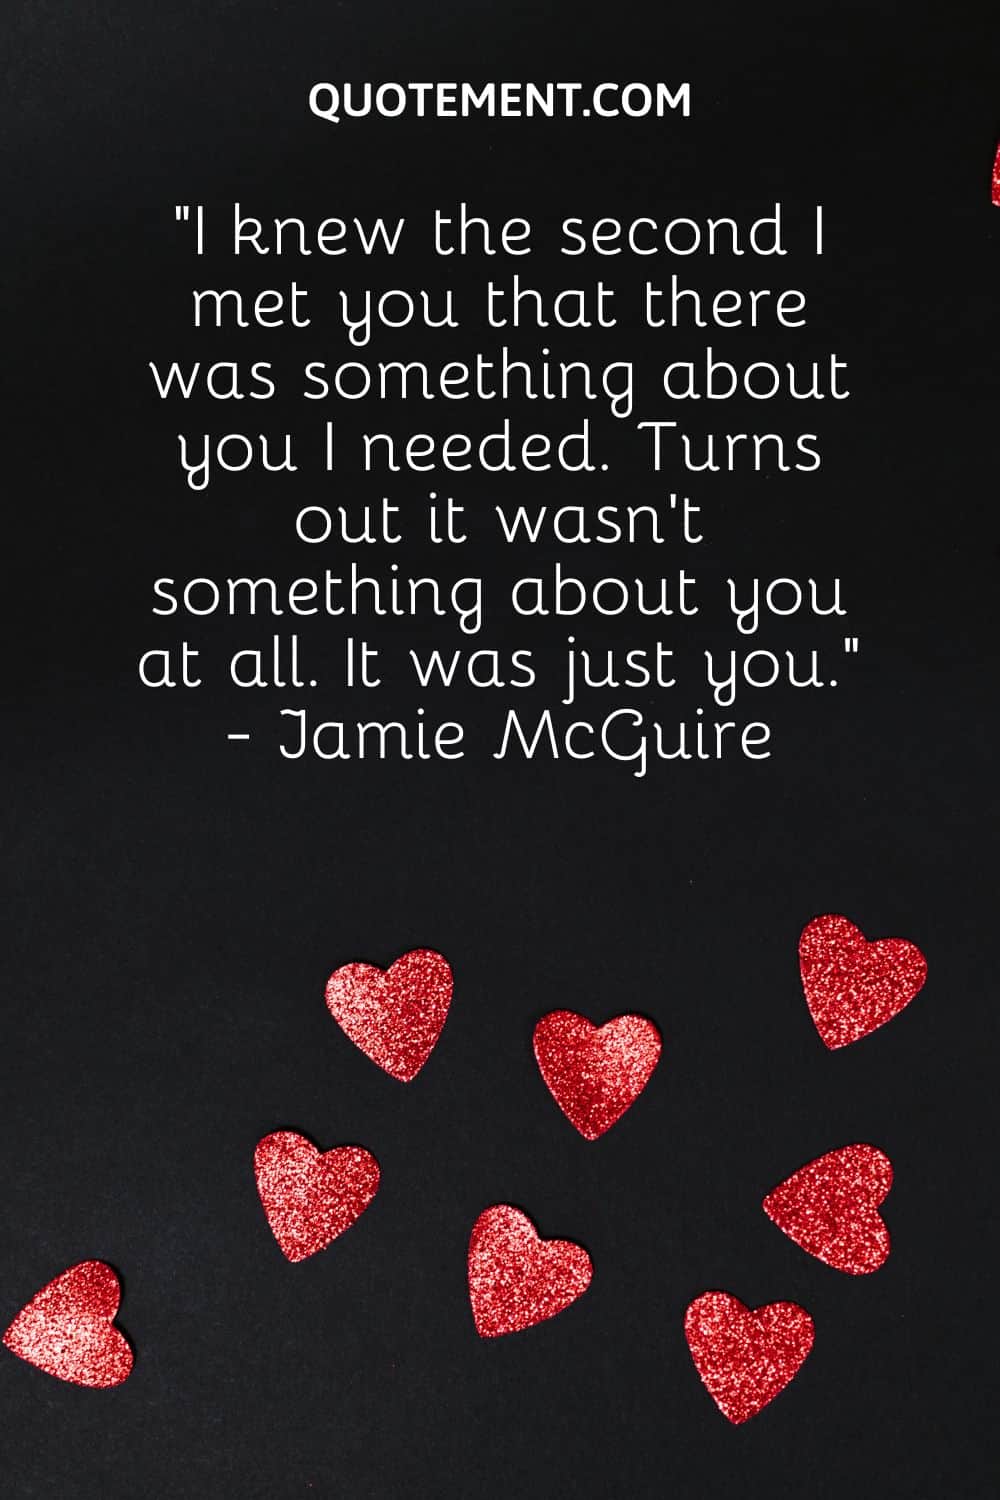 “I knew the second I met you that there was something about you I needed. Turns out it wasn’t something about you at all. It was just you.” - Jamie McGuire